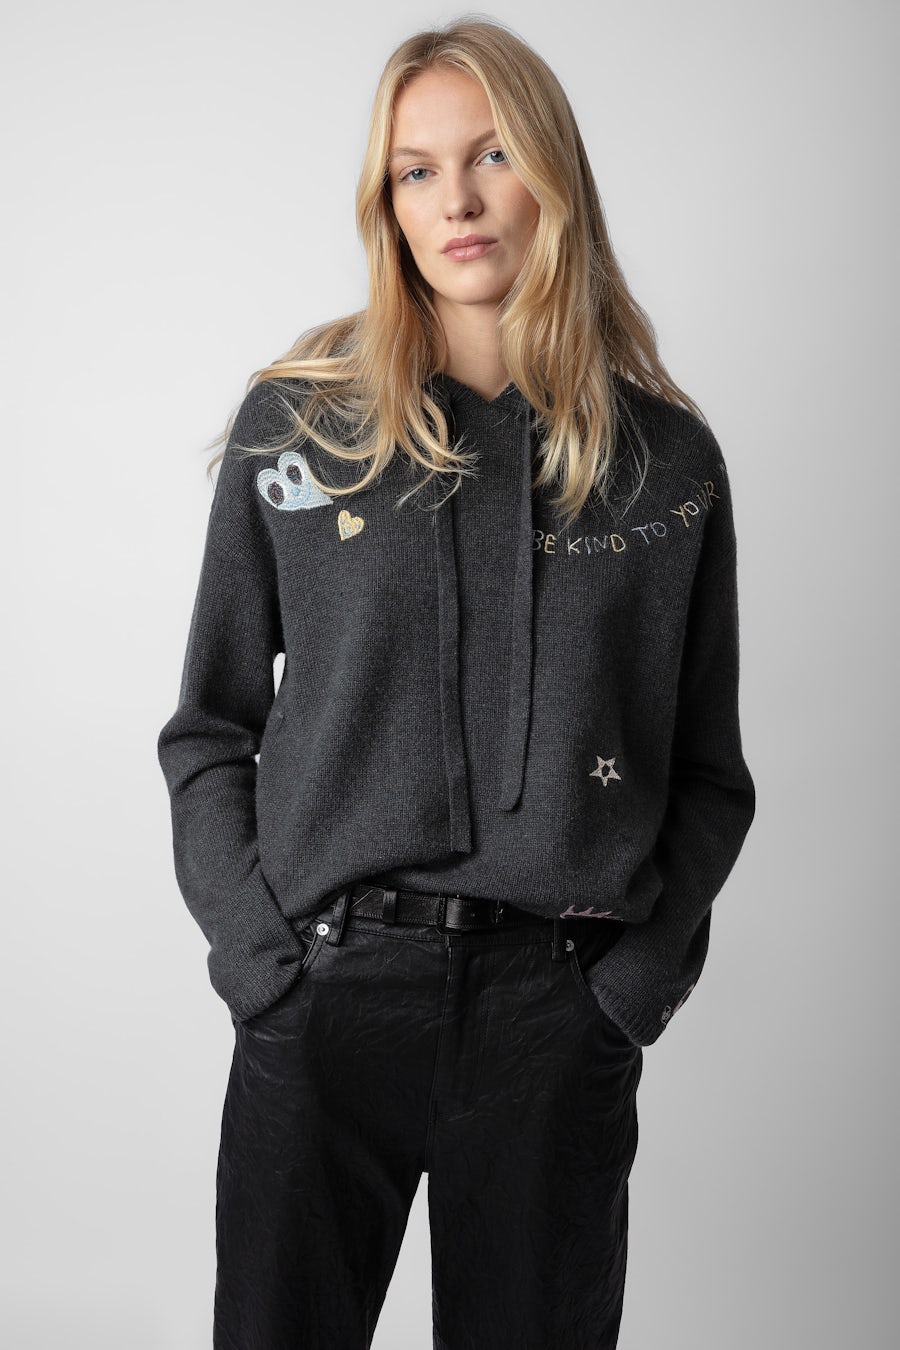 Women’s trendy and modern clothing | Zadig&Voltaire